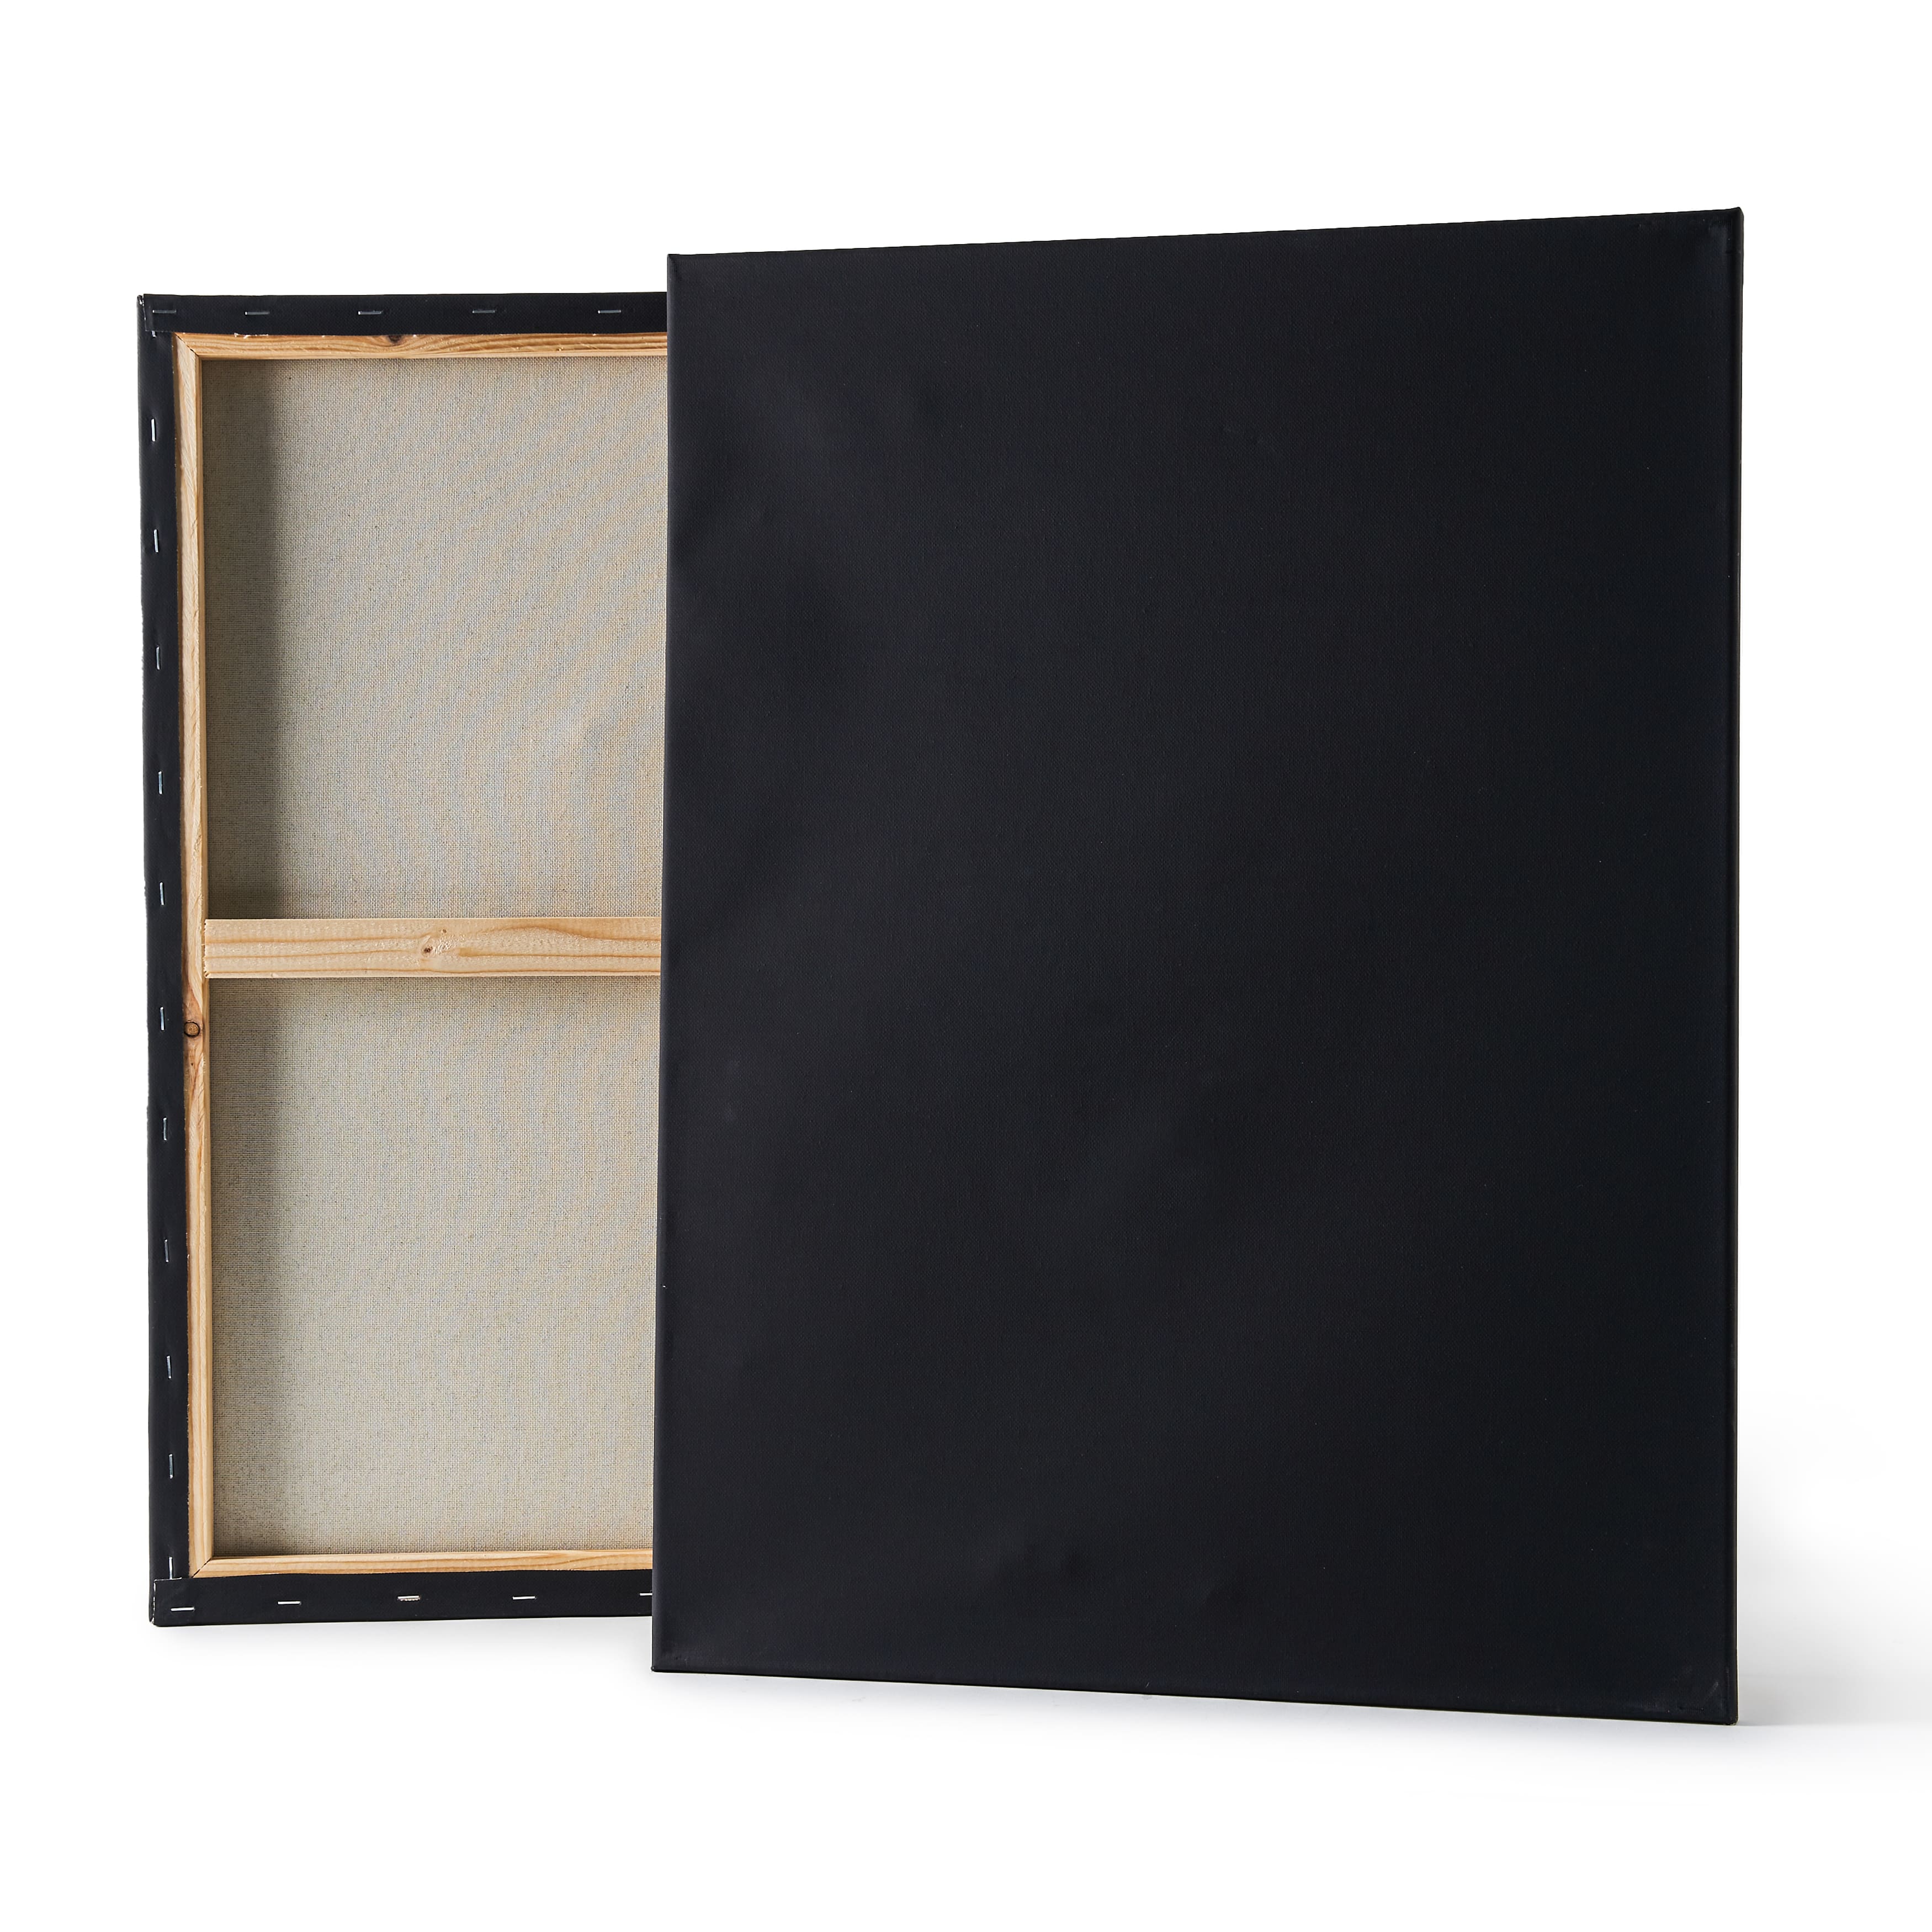 12 Packs: 2 ct. (24 total) Black Canvas Value Pack by Artist's Loft™  Necessities™